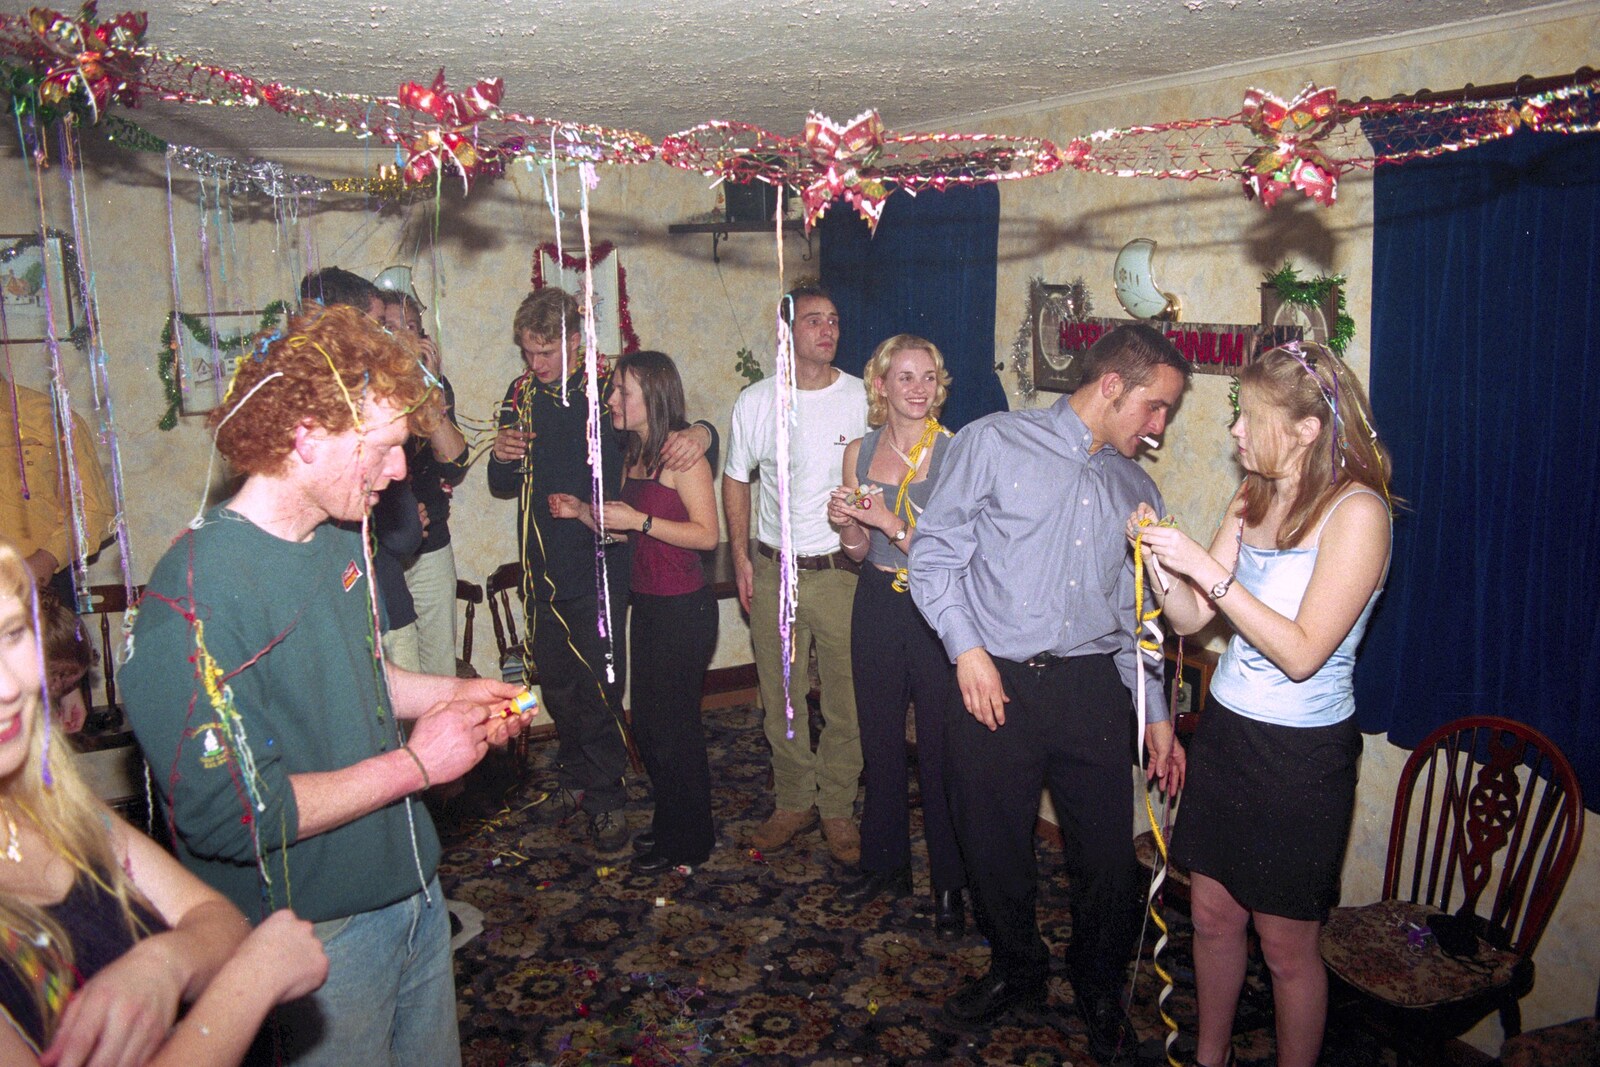 Post-popper come-down from New Year's Eve at The Swan Inn, Brome, Suffolk - 31st December 1999